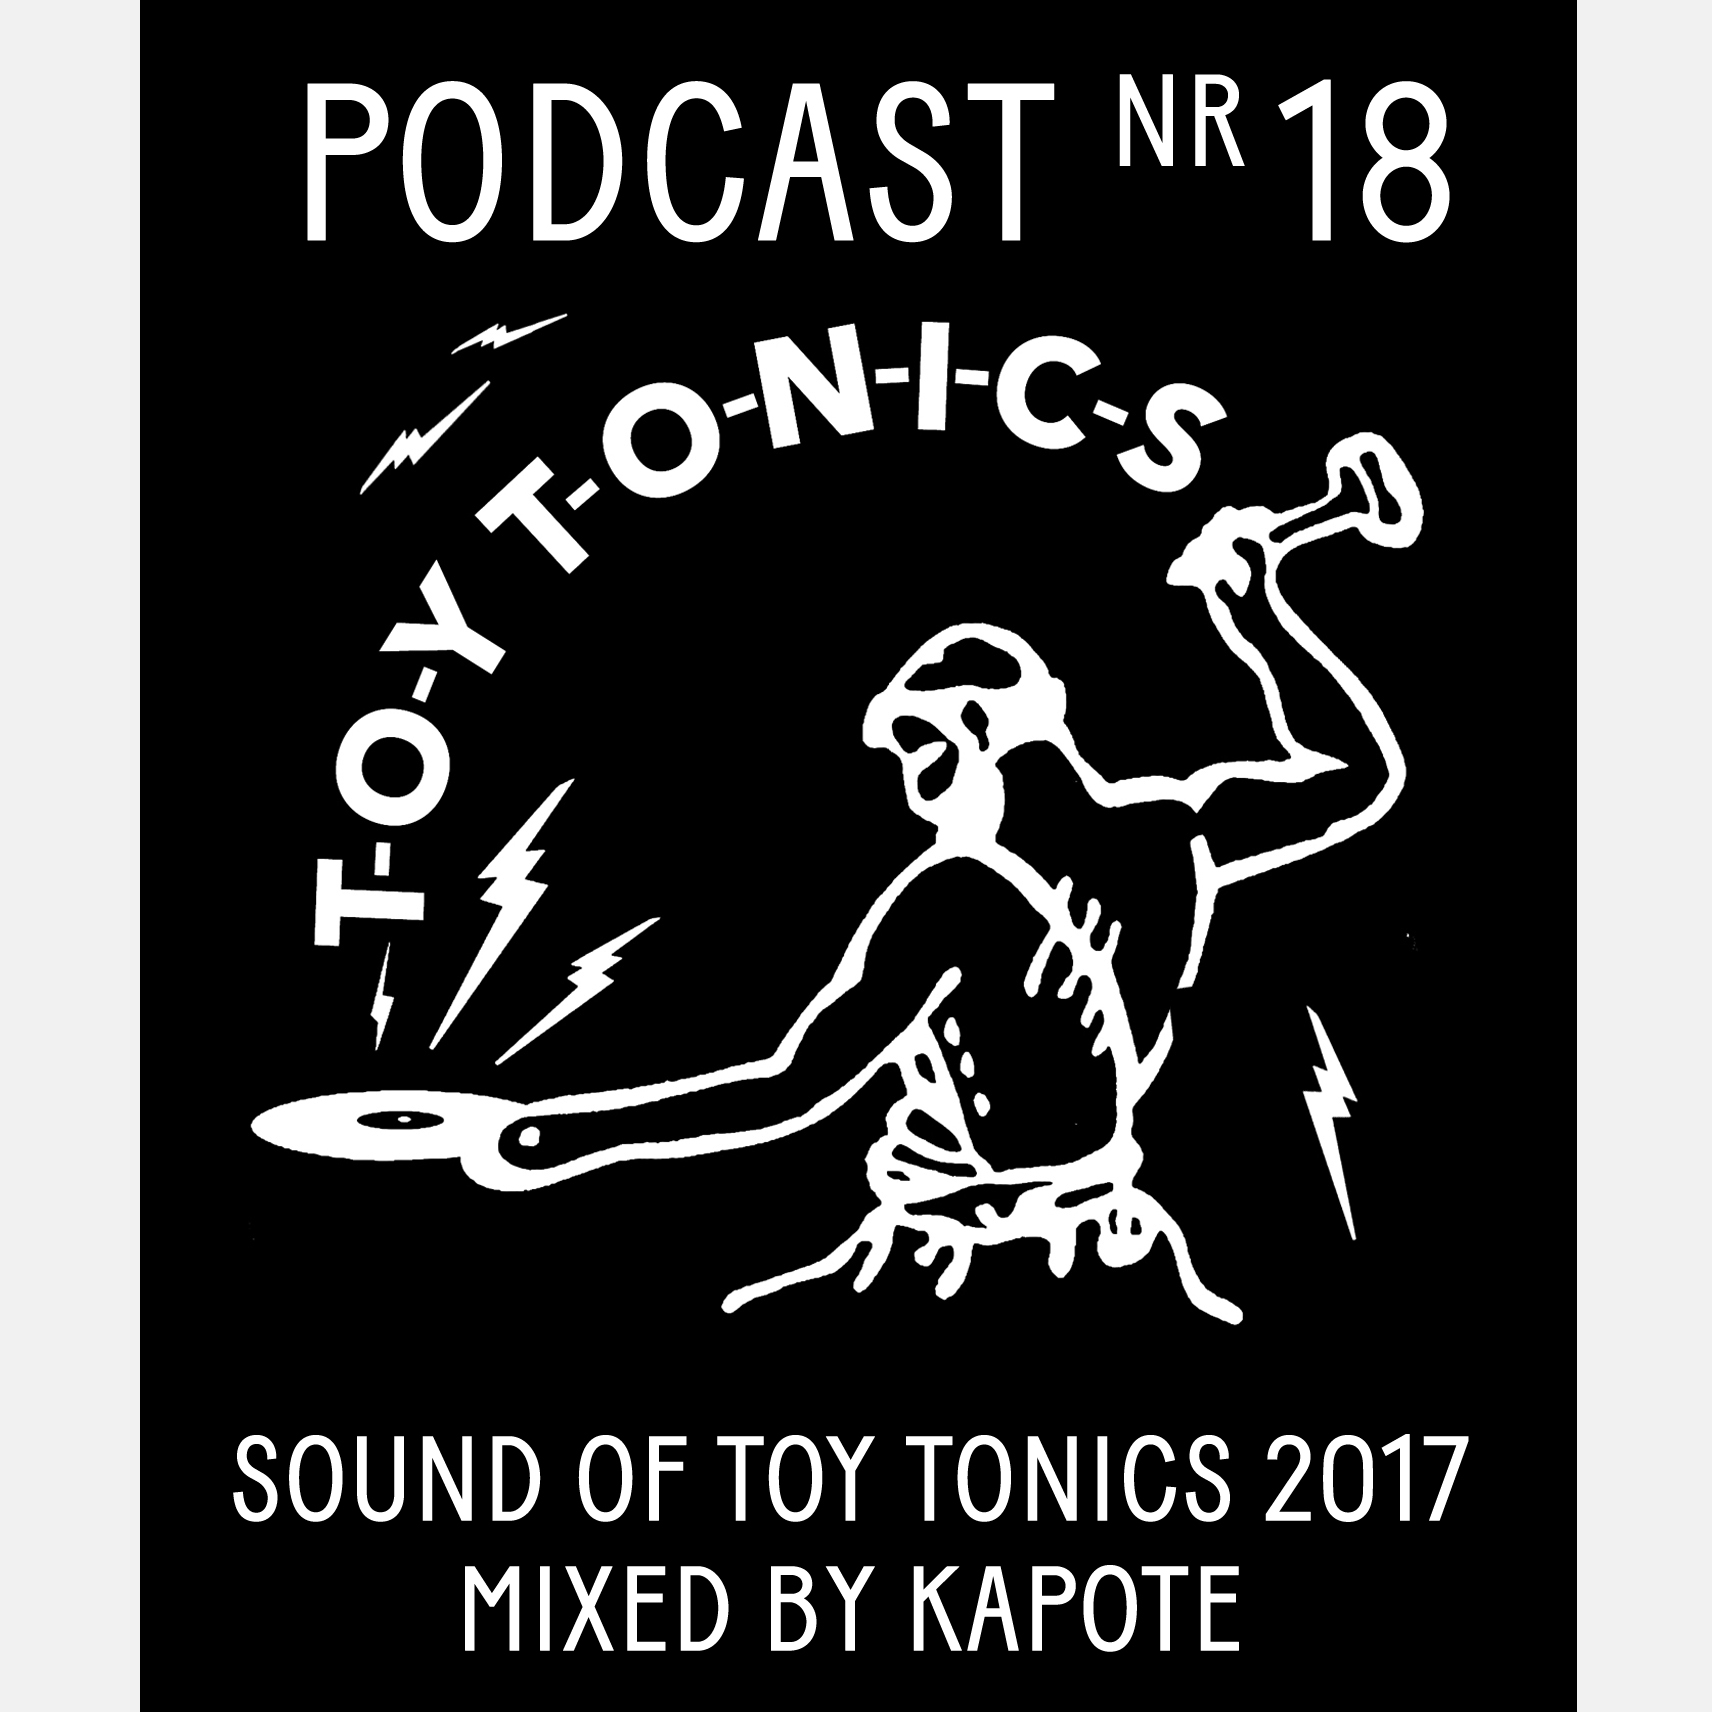 PODCAST NR 18 – Sound of Toy Tonics 2017 - Mixed by Kapote